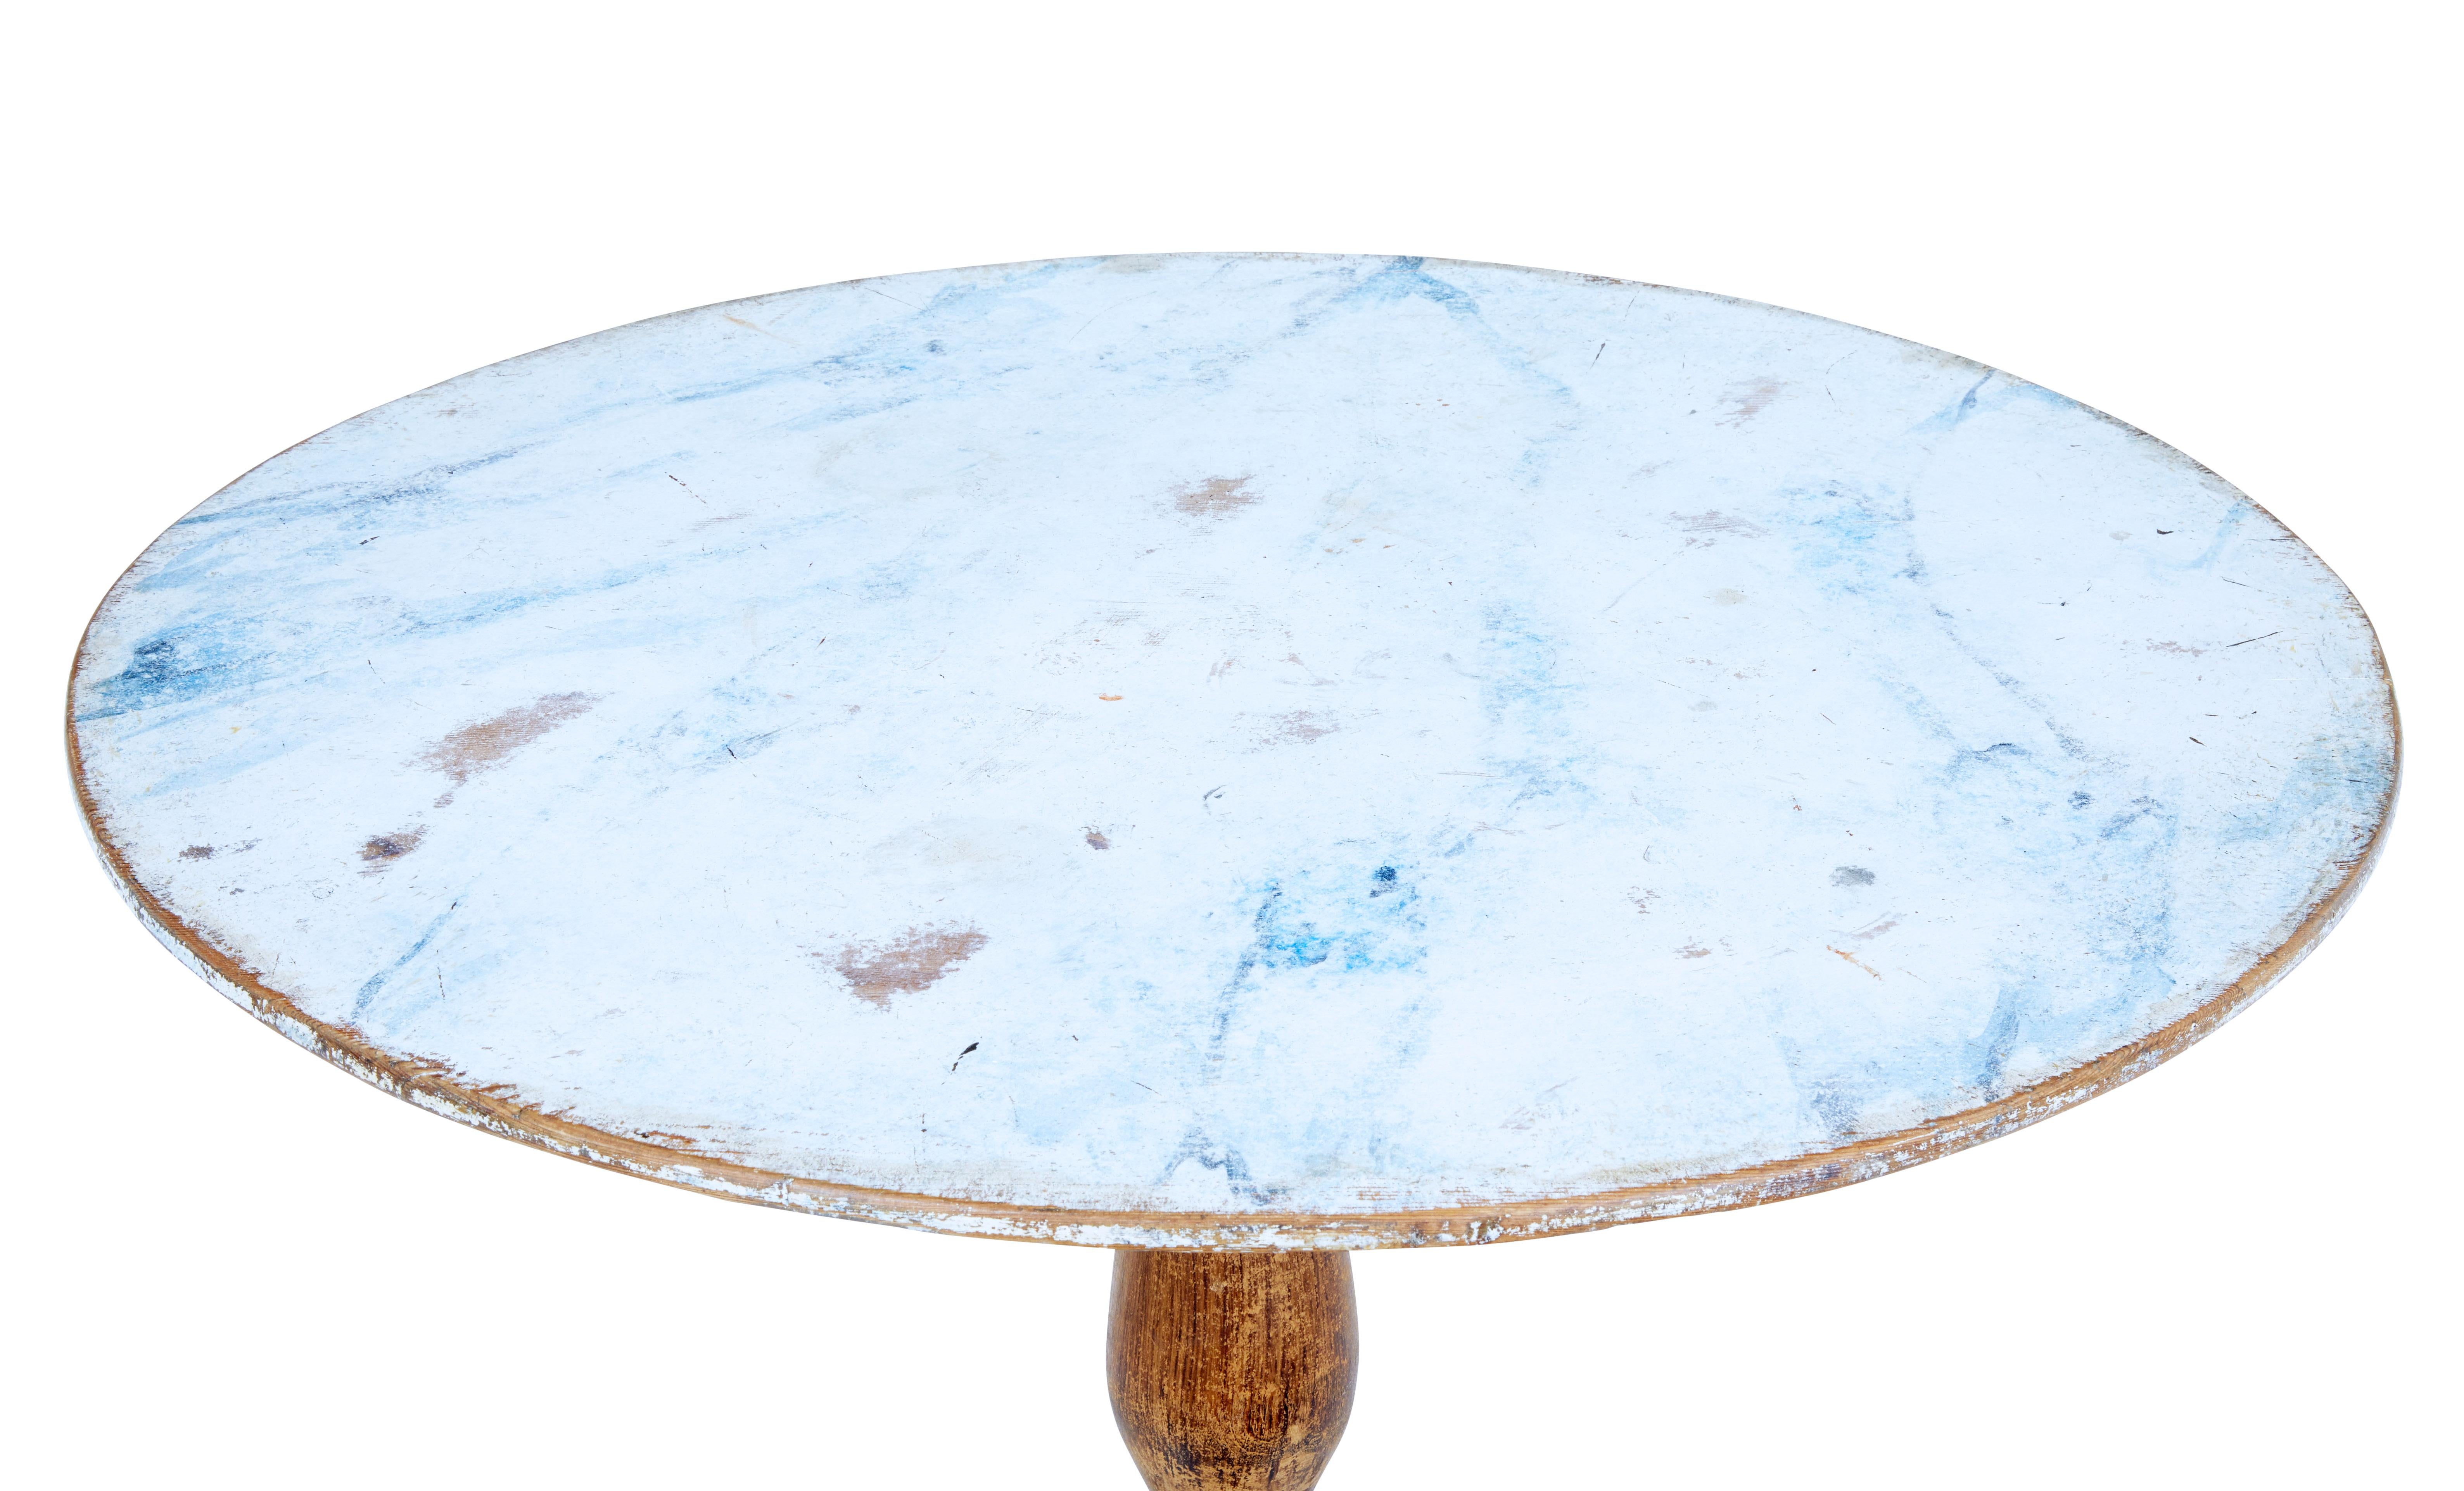 Rustic 19th Century Painted Swedish Tilt-Top Table